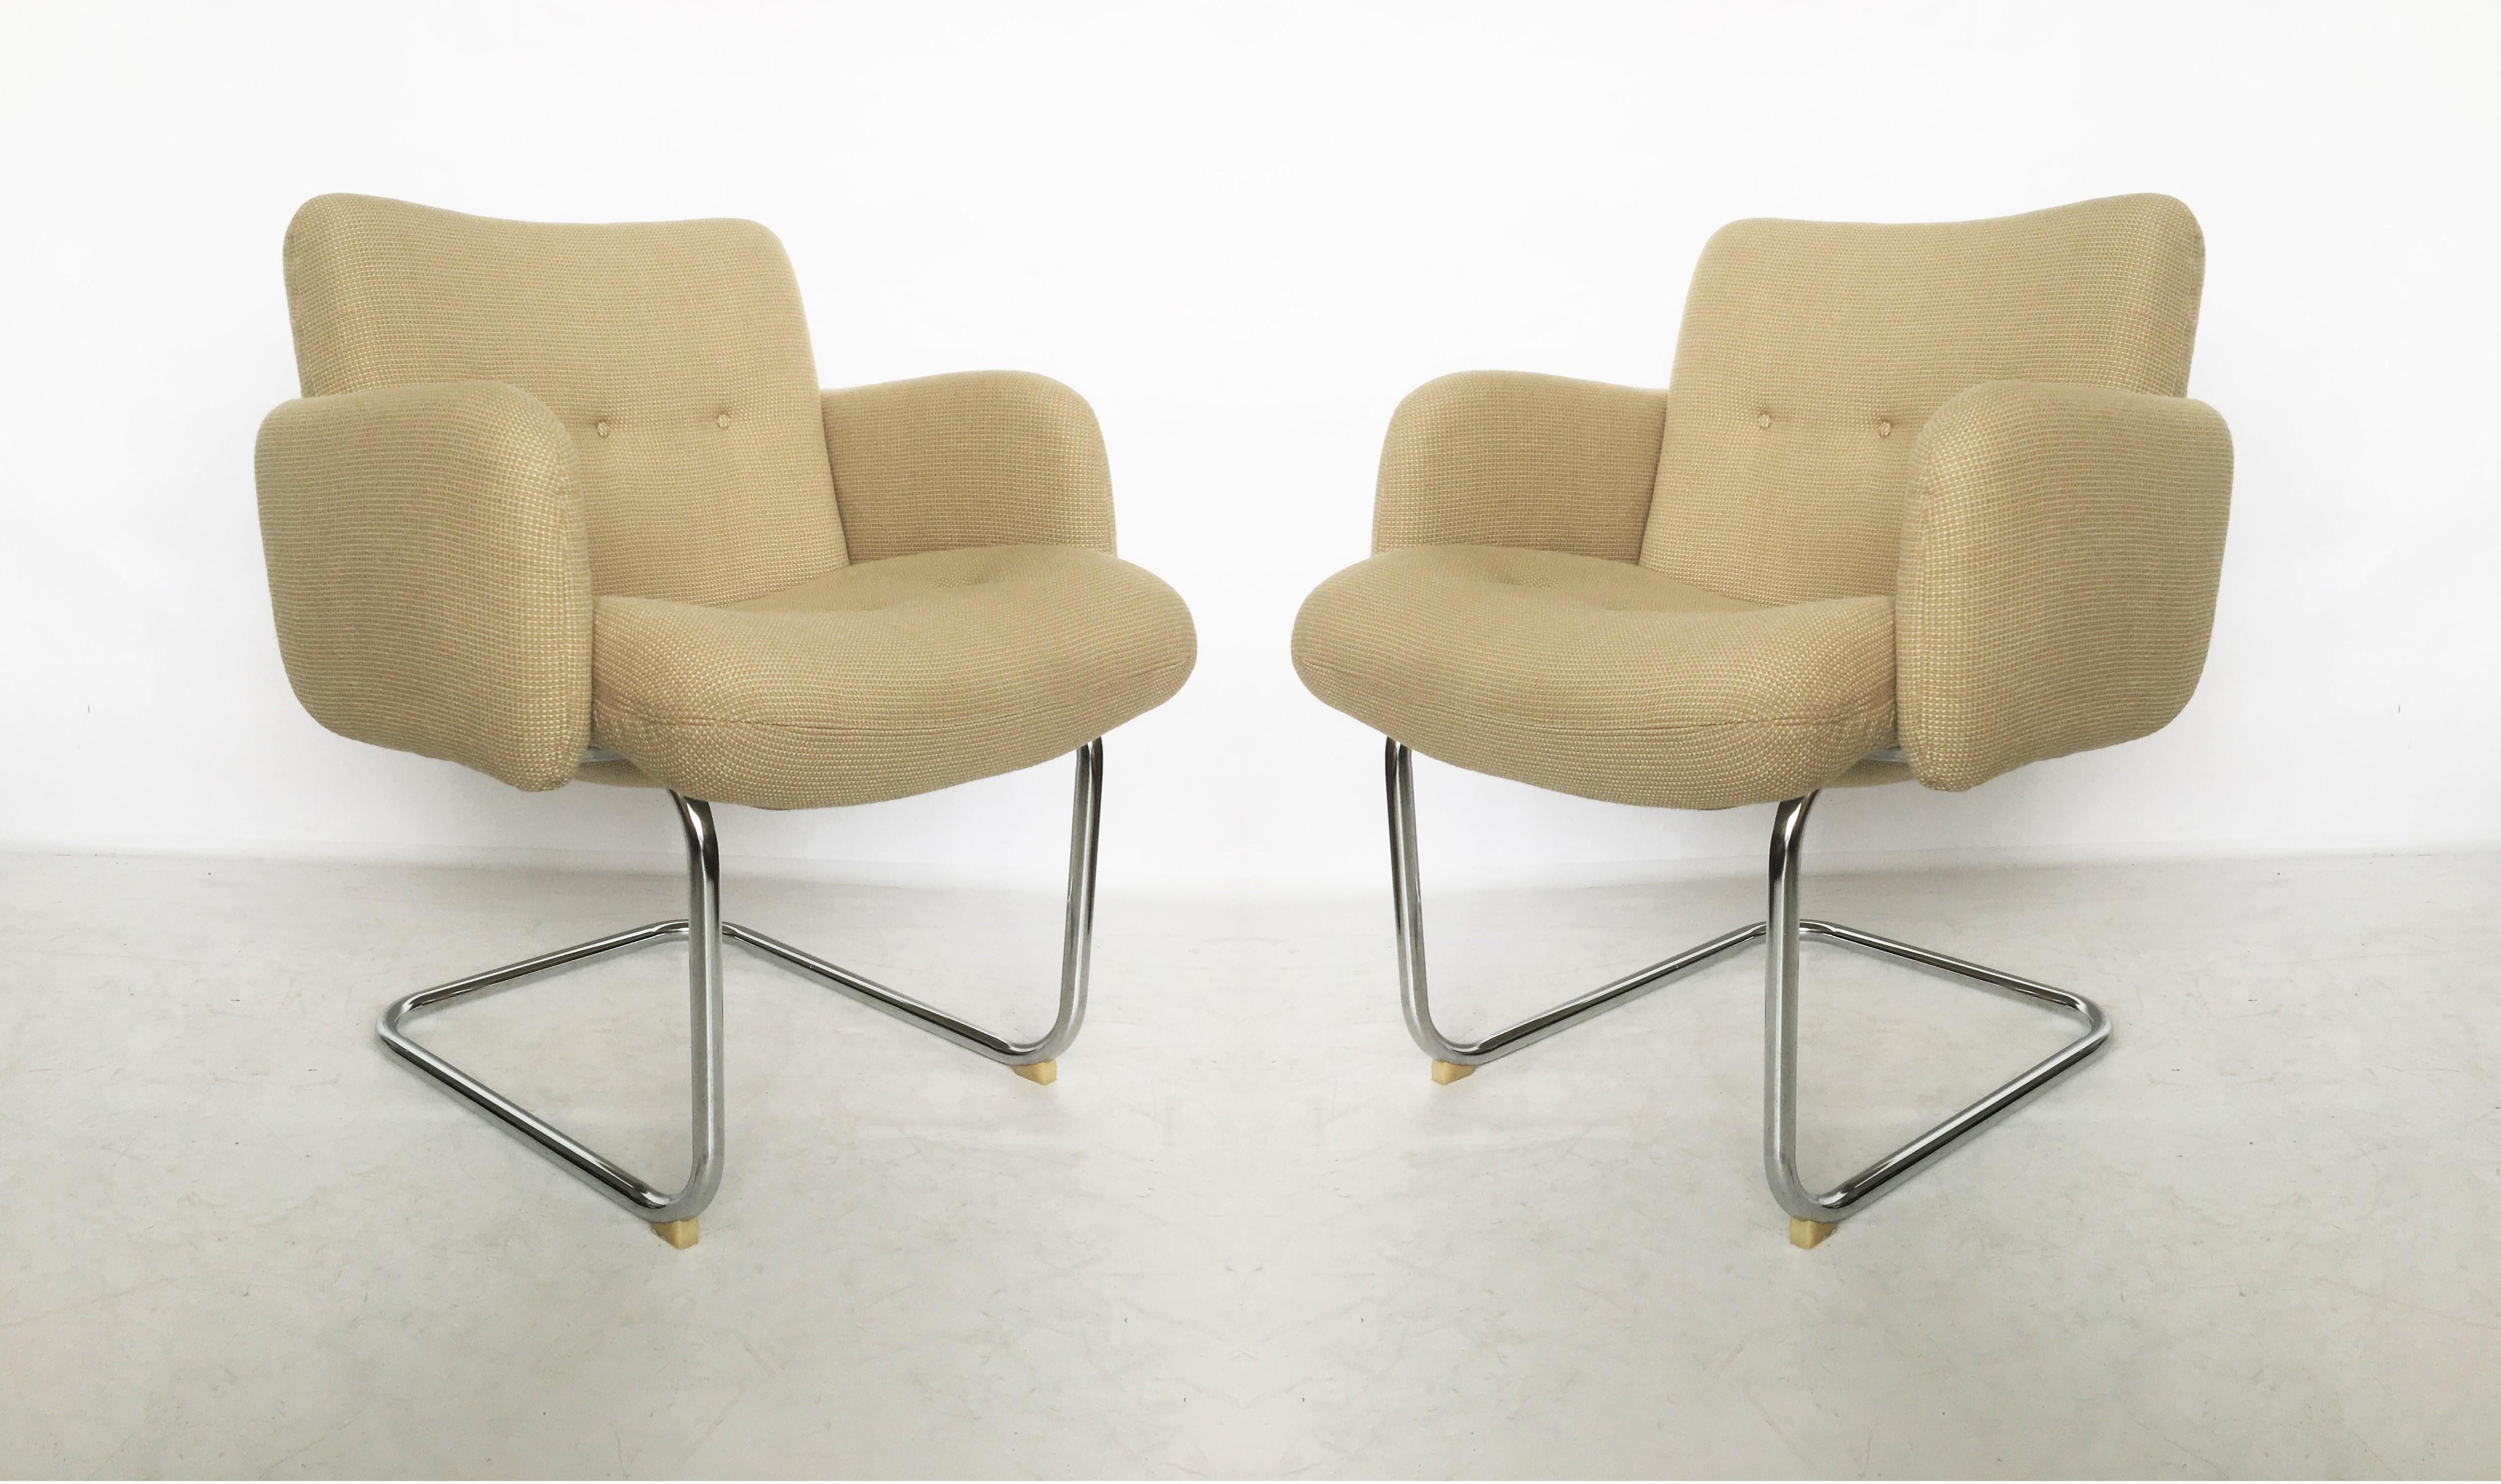 Adorable pair of Harvey Probber occasional lounge chairs. Very comfortable chairs with chrome cantilevered frames upholstered in their original light tan color fabric. Can be used as occasional chairs, game or desk chairs. One chairs retains